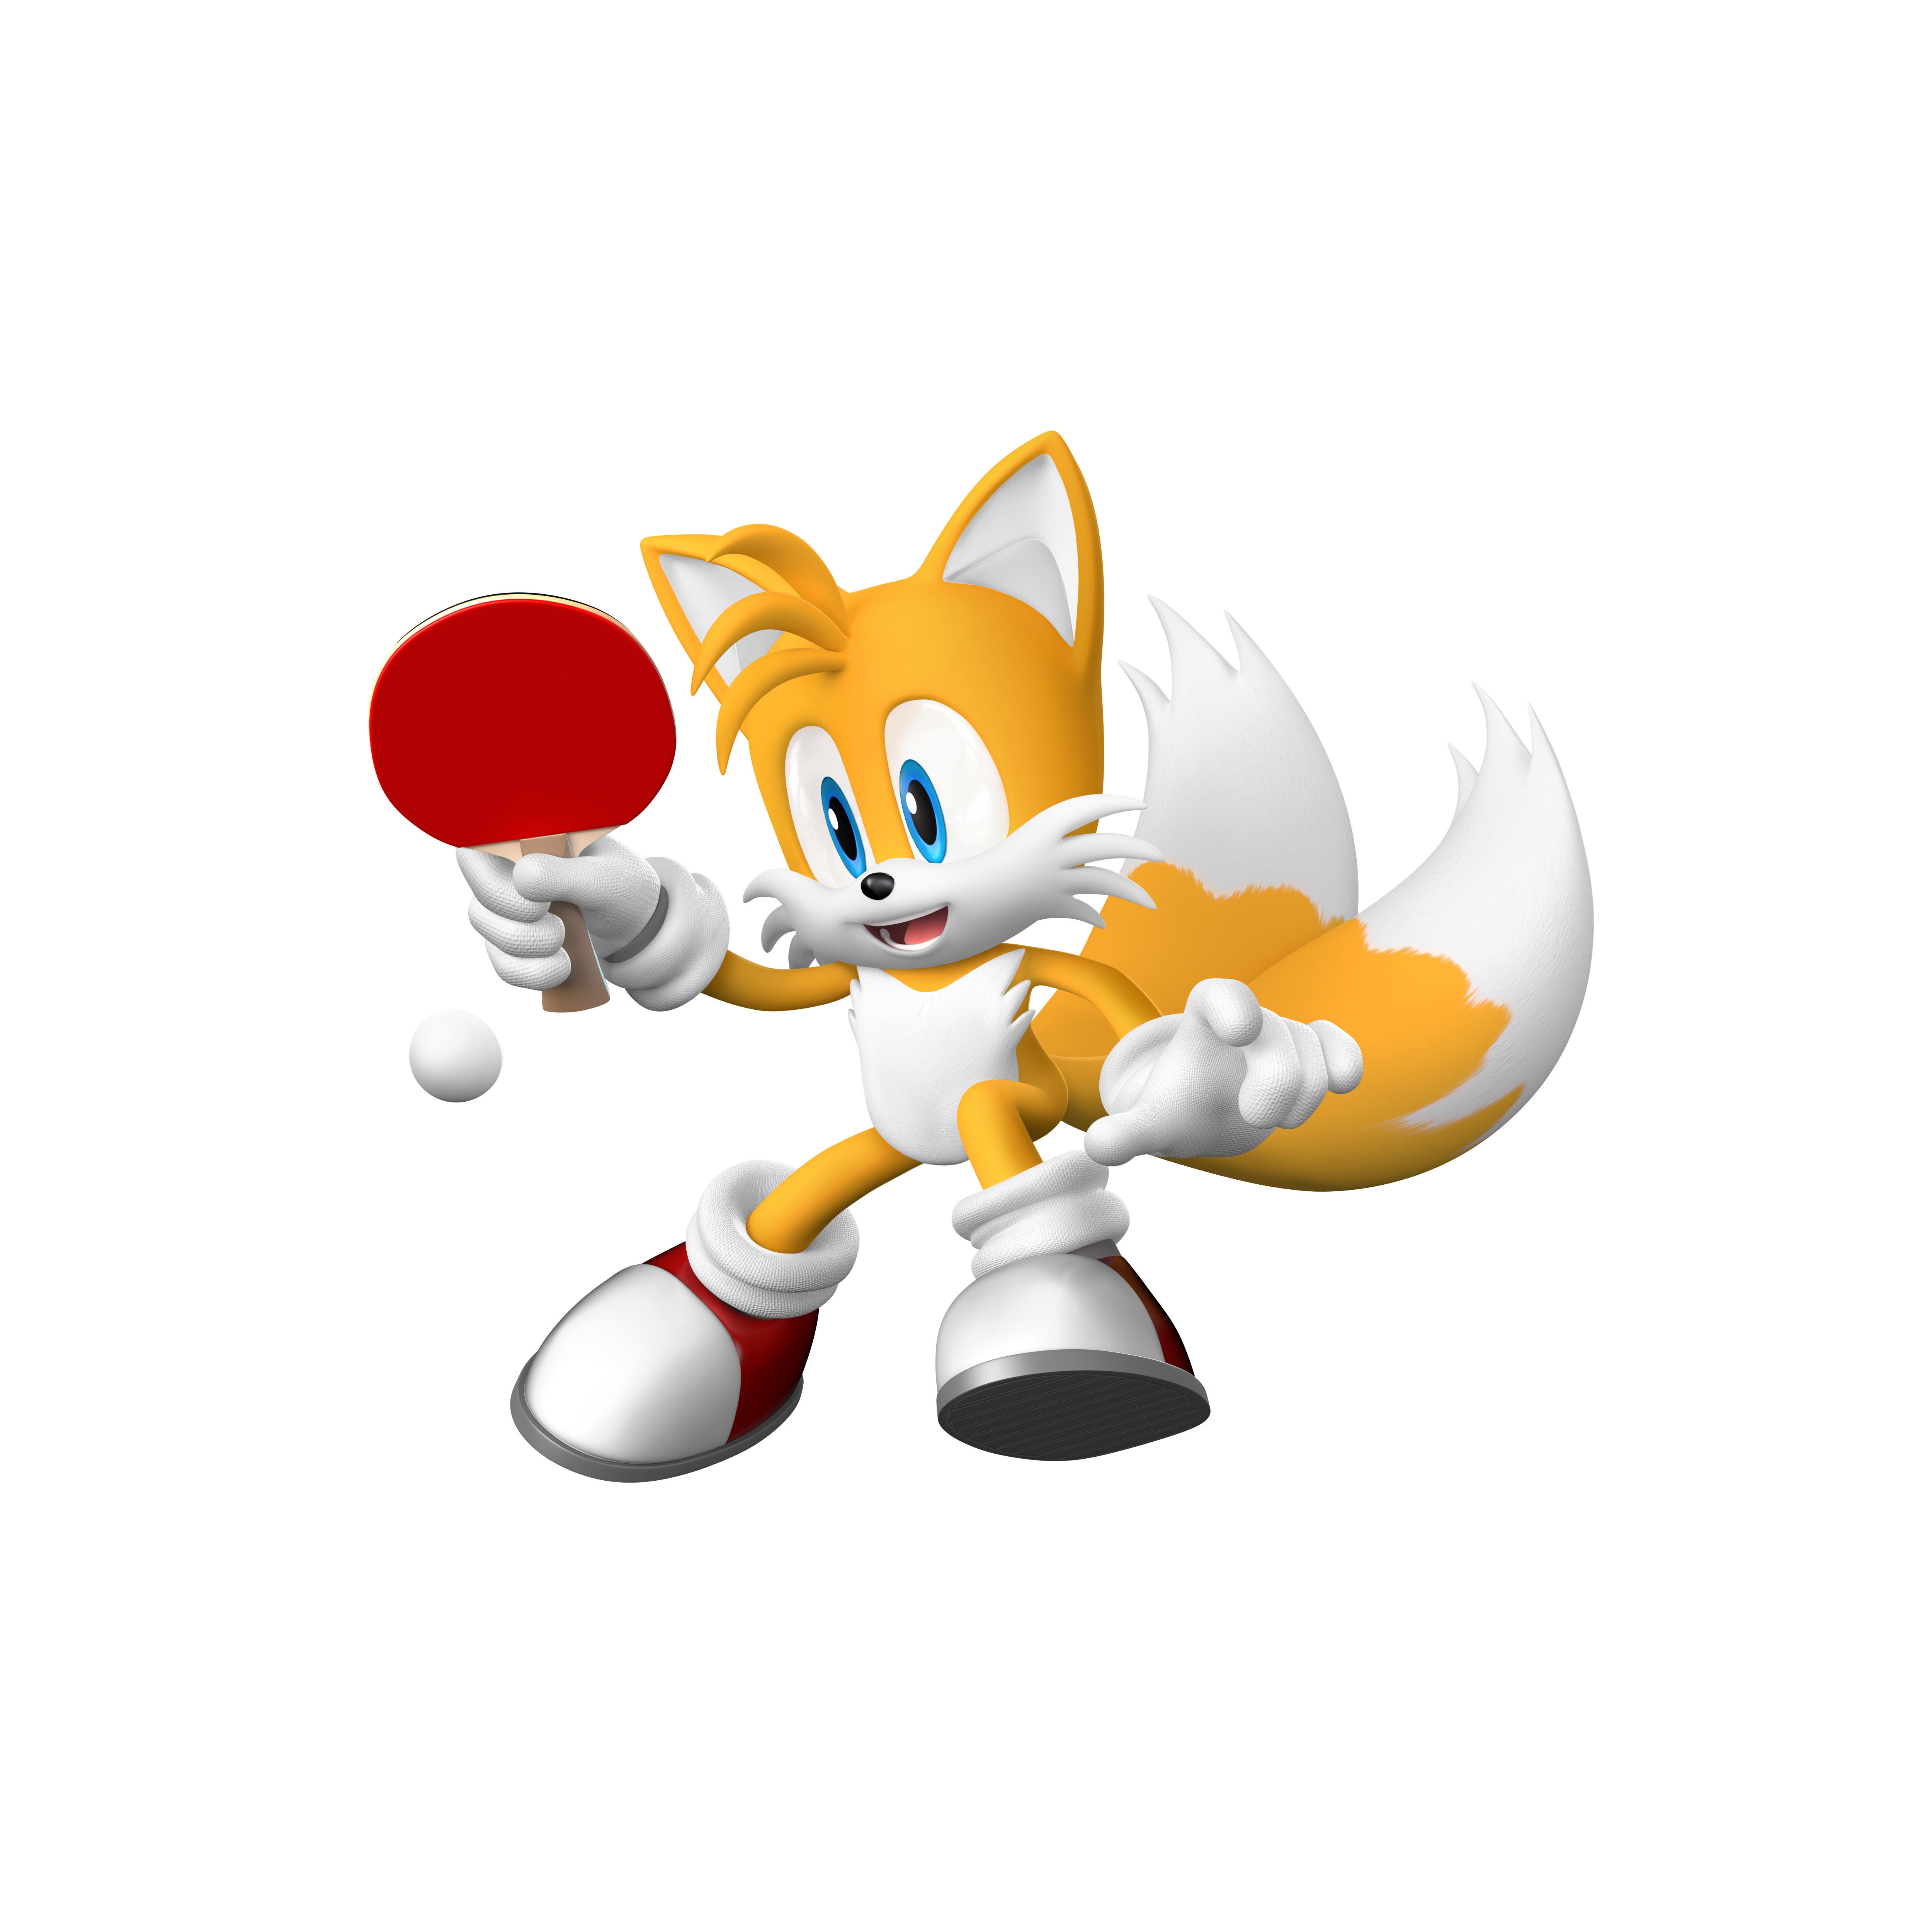 Sonic 2012. Соник 2012. Соник понг. Tails PNG. Sonic and Mario at the Olympic games Amy Rose.